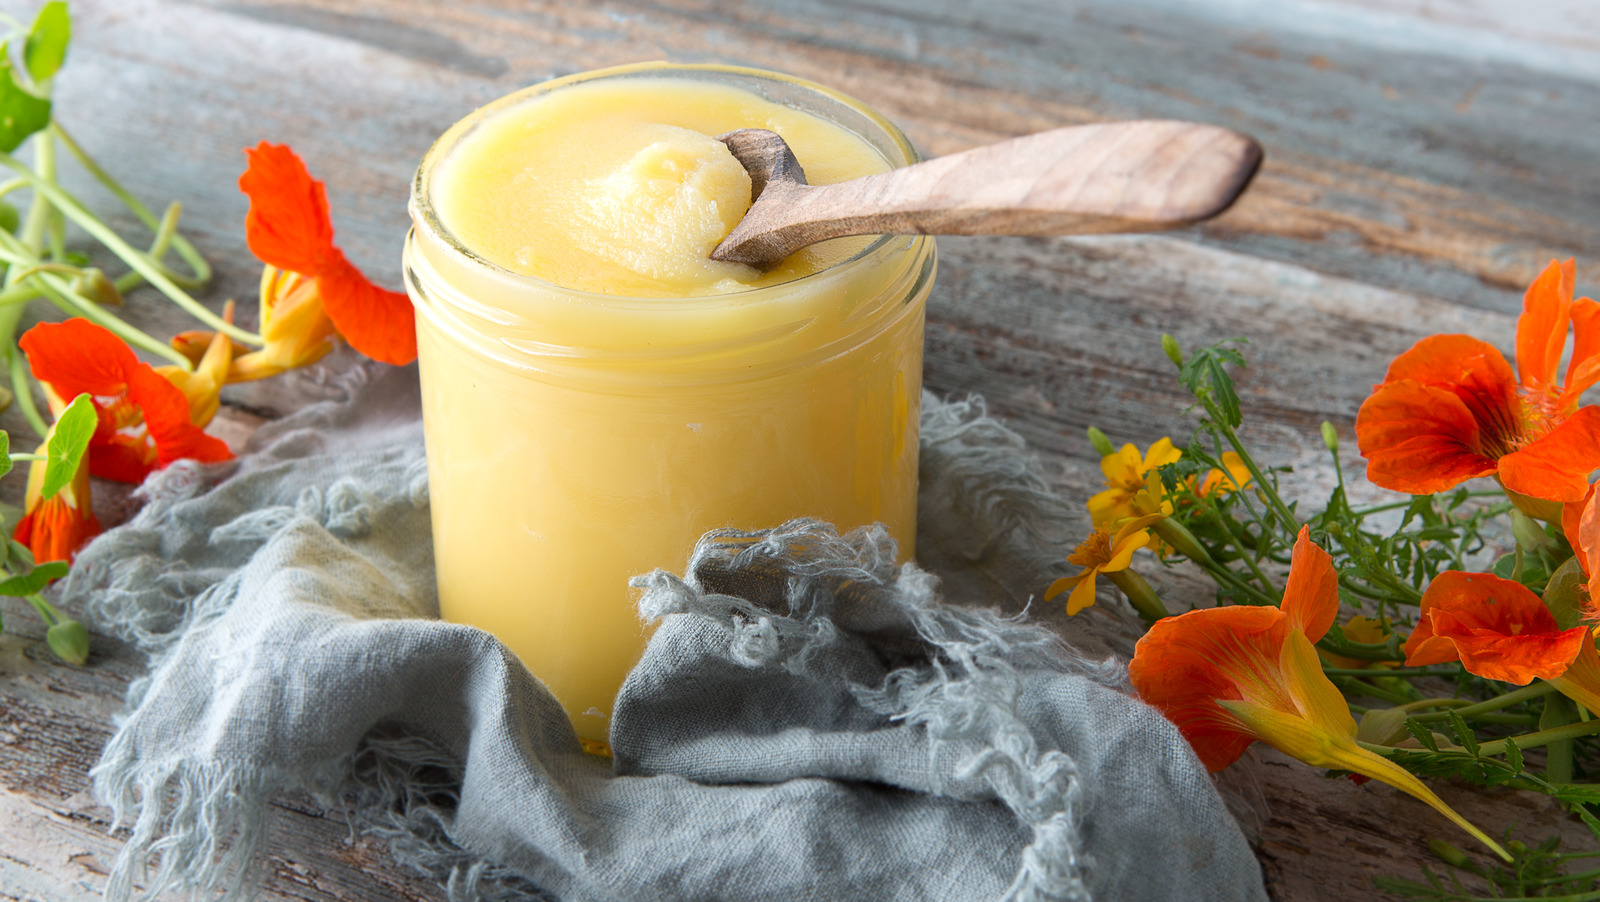 When You Eat Ghee Everyday, This Is What Happens To Your Body